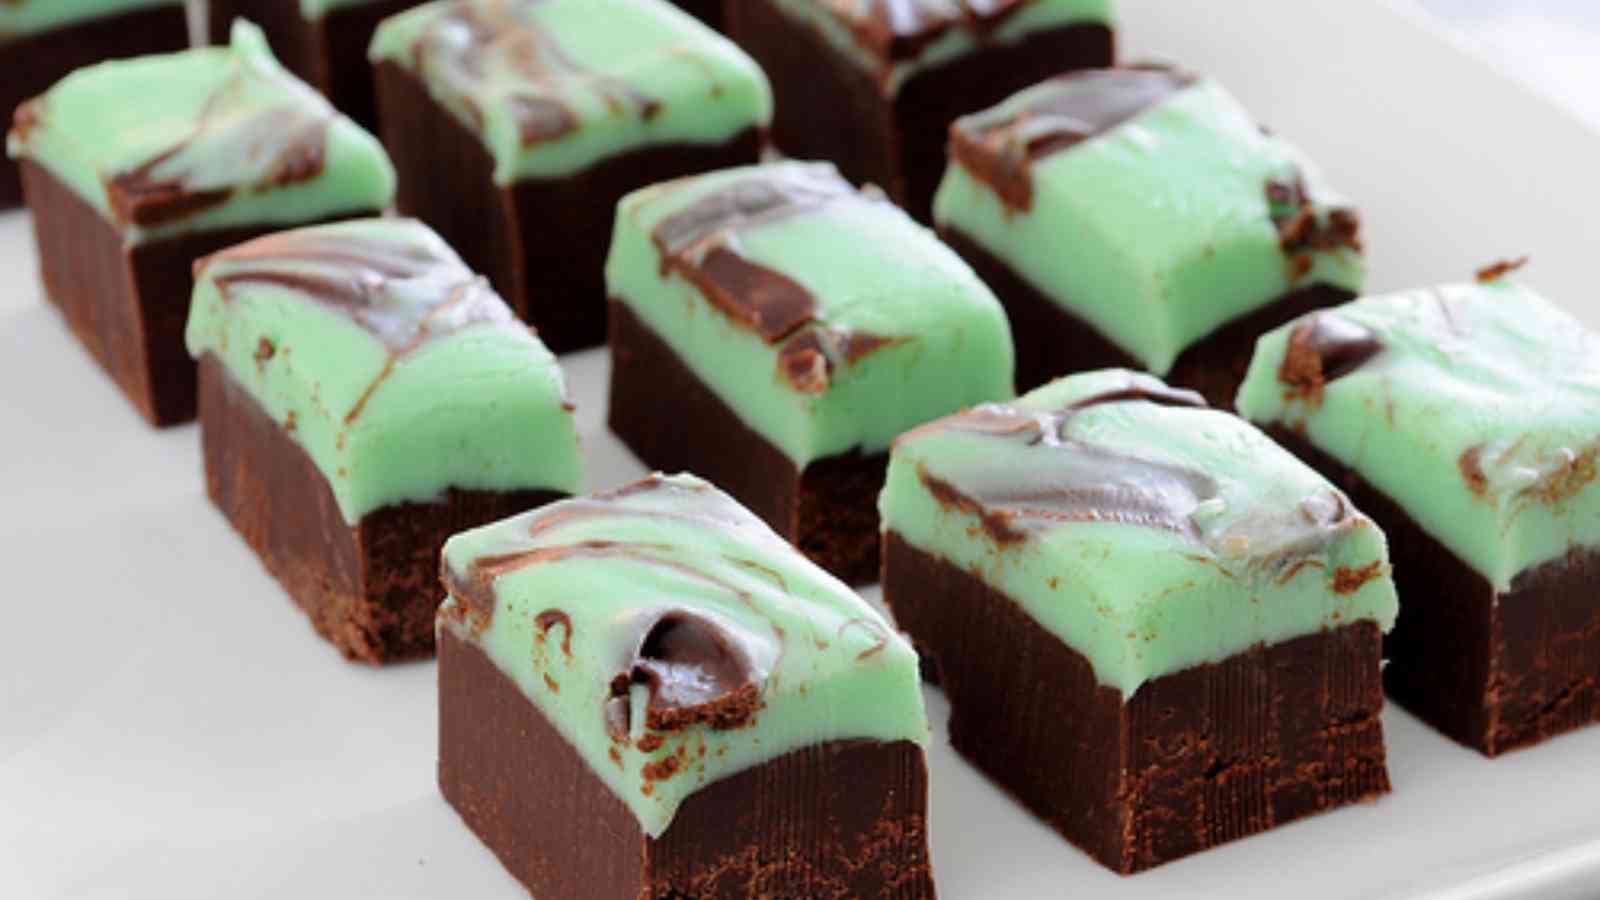 National Chocolate Mint Day 2023: Date, Background, Facts